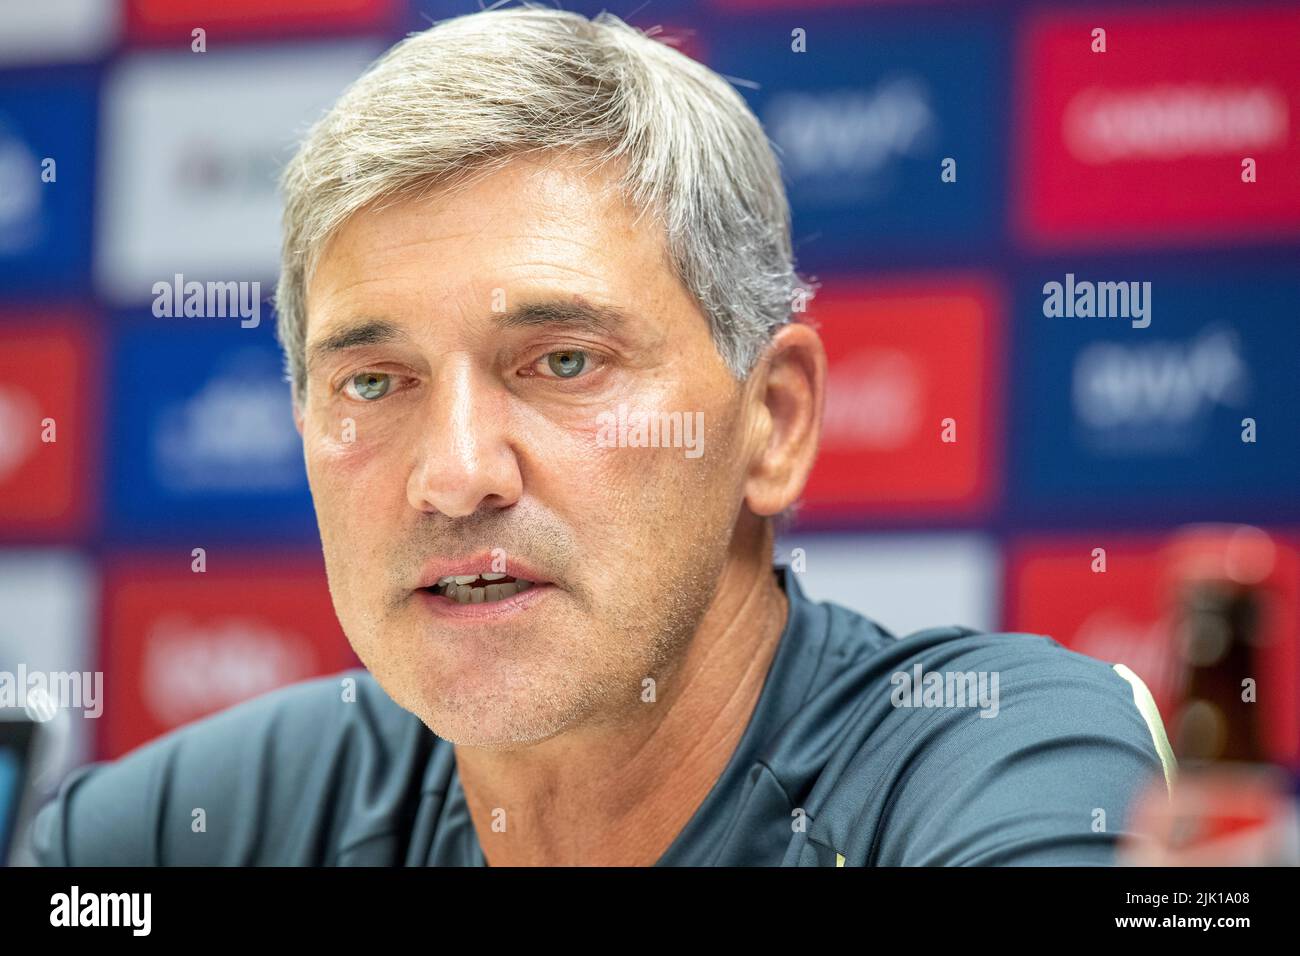 Brussels, Belgium. 29th July, 2022. Anderlecht head coach Felice Mazzu pictured during the weekly press conference of Belgian soccer team RSC Anderlecht, Friday 29 July 2022 in Brussels, to discuss the next game in the national competition. BELGA PHOTO NICOLAS MAETERLINCK Credit: Belga News Agency/Alamy Live News Stock Photo